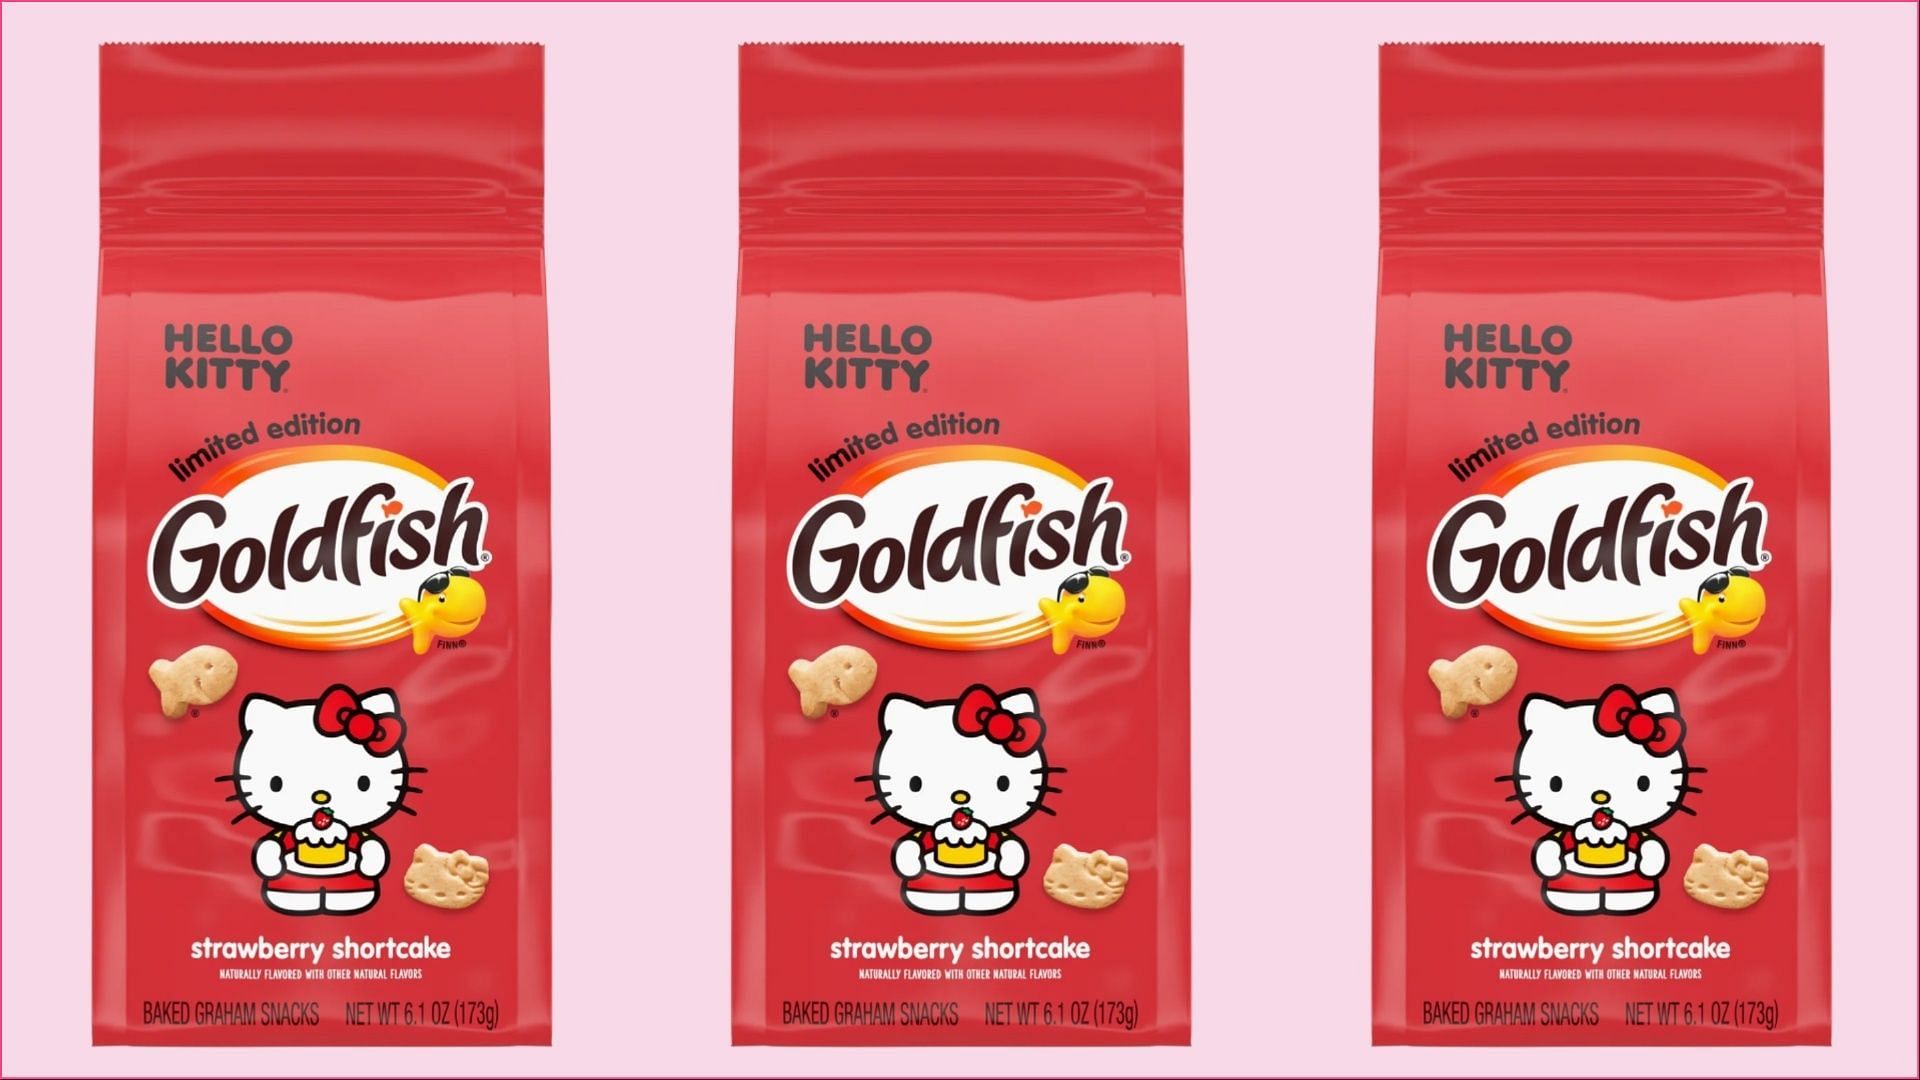 The new Hello Kitty Strawberry Shortcake flavored graham crackers hit stores this month (Image via Goldfish)